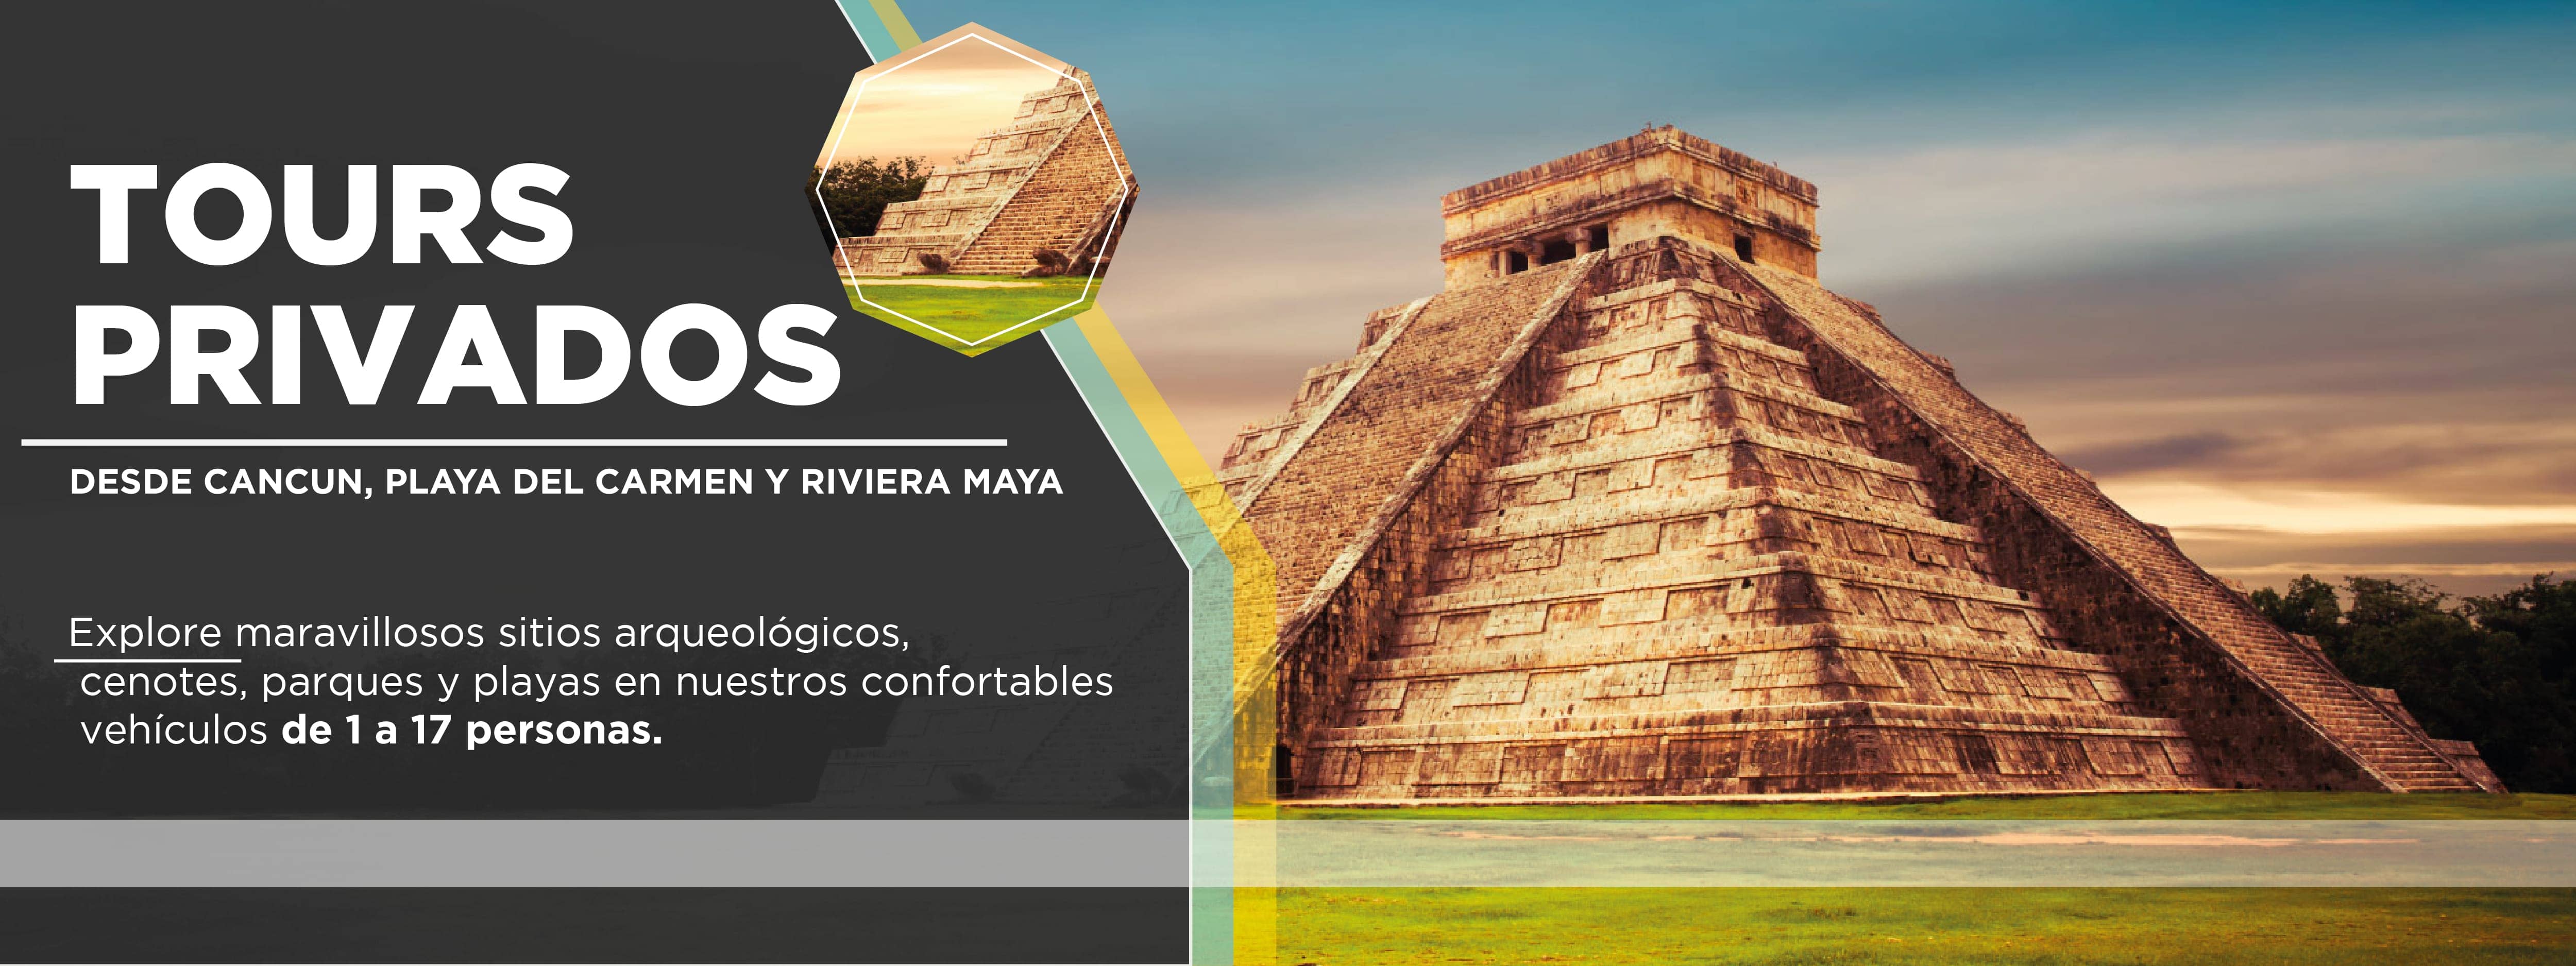 PRIVATE TOURS FROM CANCUN, PLAYA DEL CARMEN AND RIVIERA MAYA